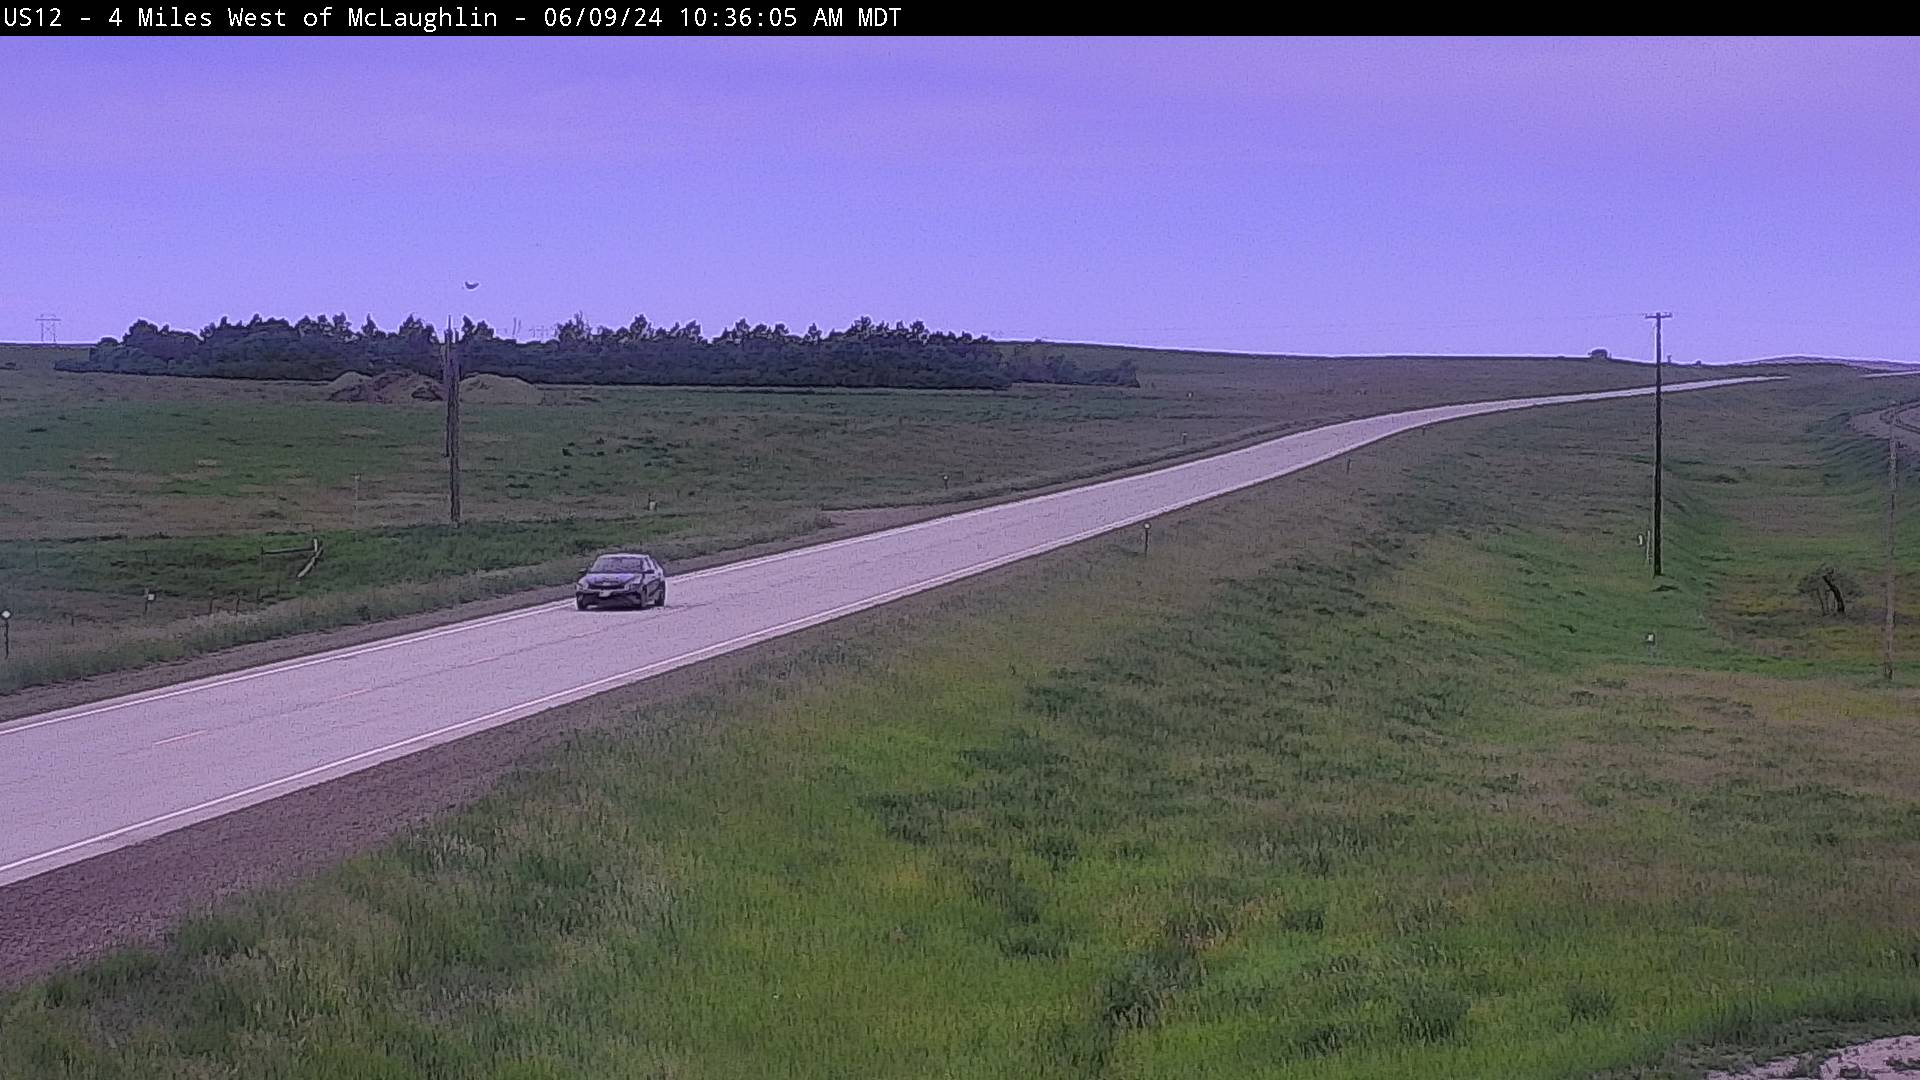 4 miles west of town US-12 @ MP 154 - West Traffic Camera